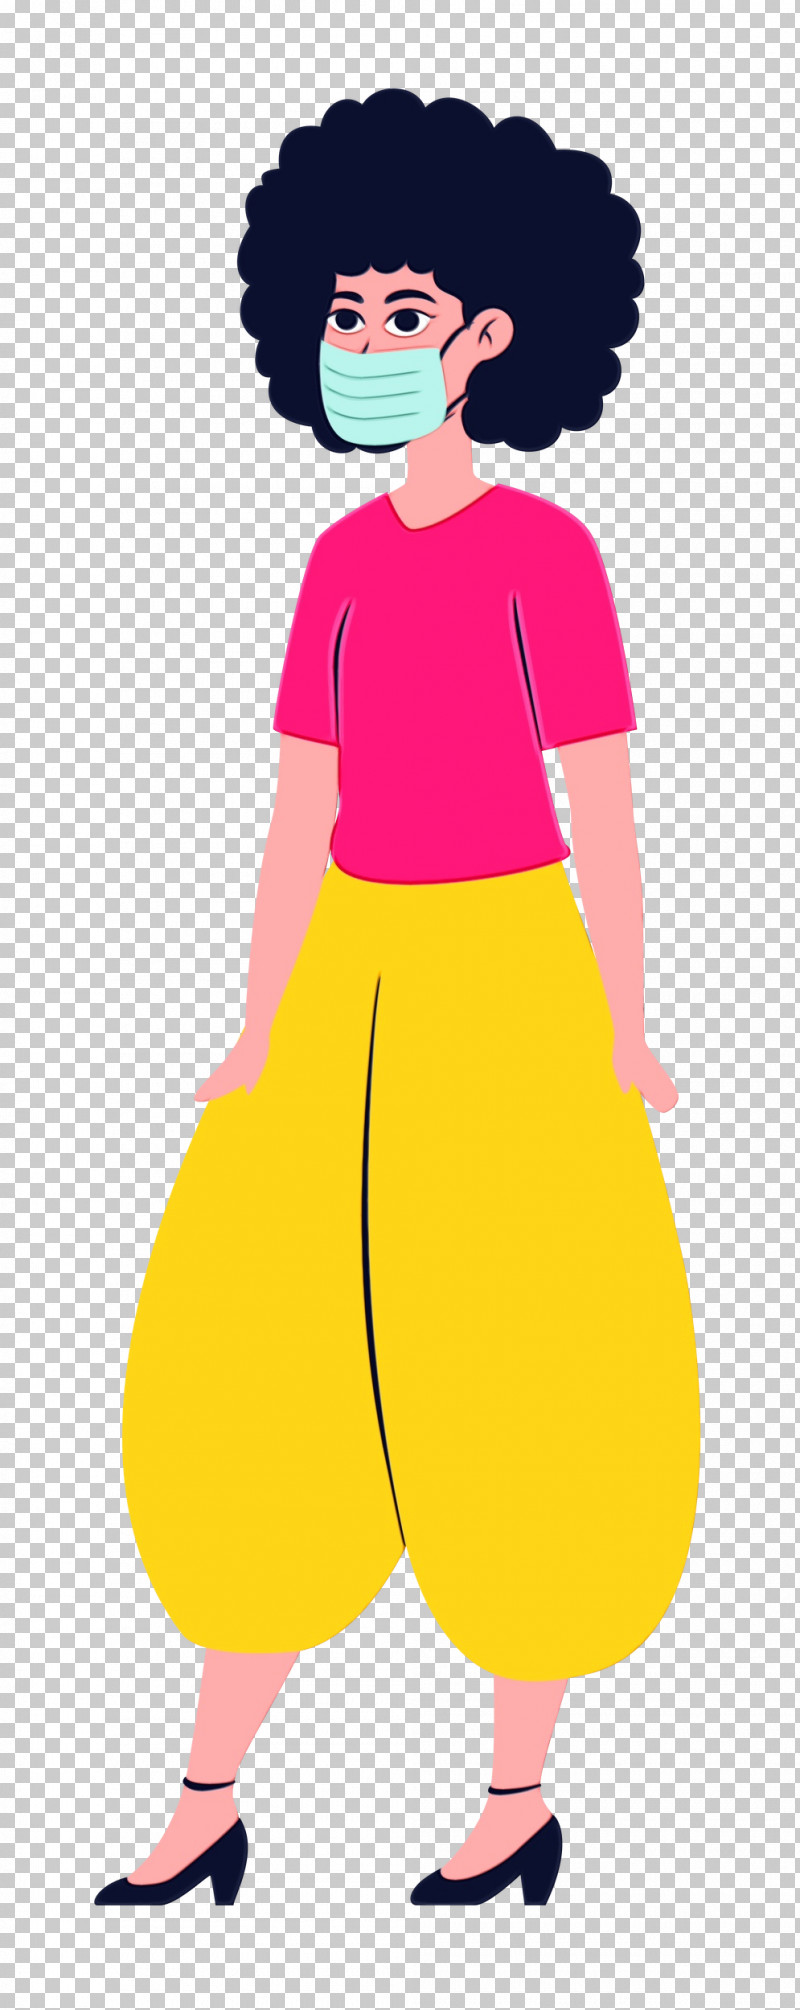 Cartoon Costume Yellow Happiness PNG, Clipart, Cartoon, Costume, Girl, Happiness, Mask Free PNG Download